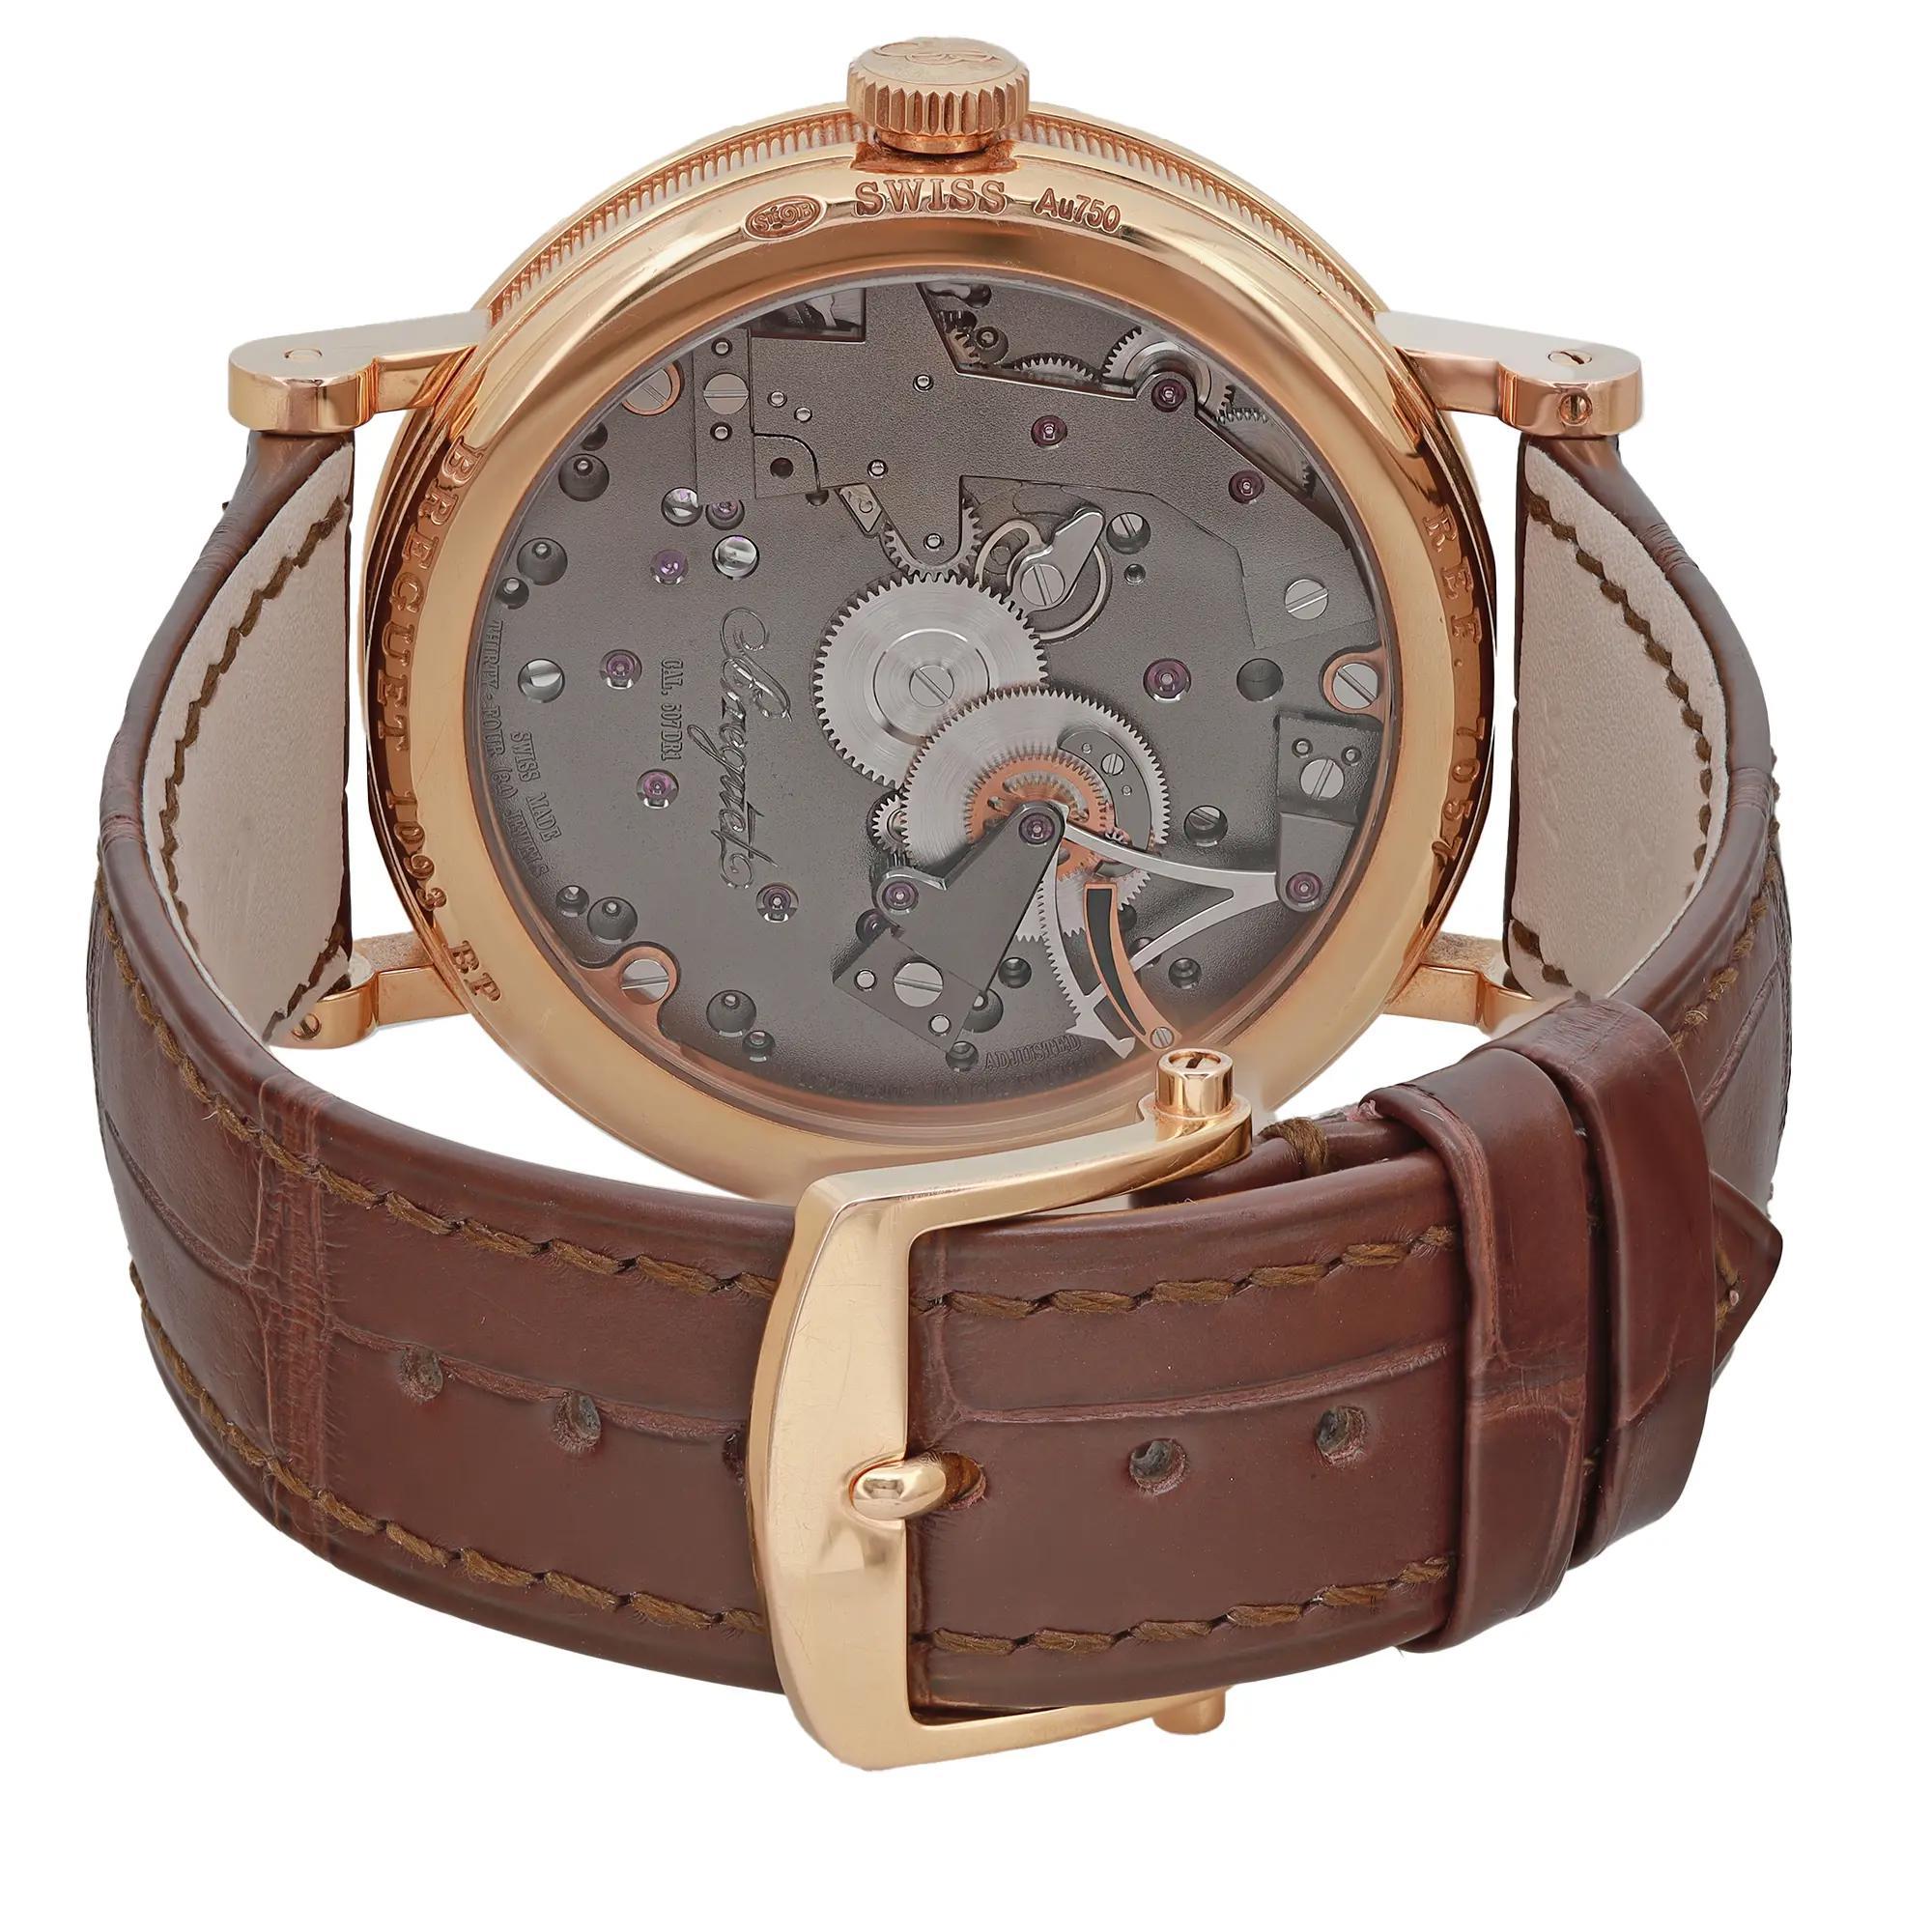 Breguet Tradition 18K Rose Gold Skeleton Dial Manual Wind Watch 7057BR/G9/9W6 In Excellent Condition For Sale In New York, NY